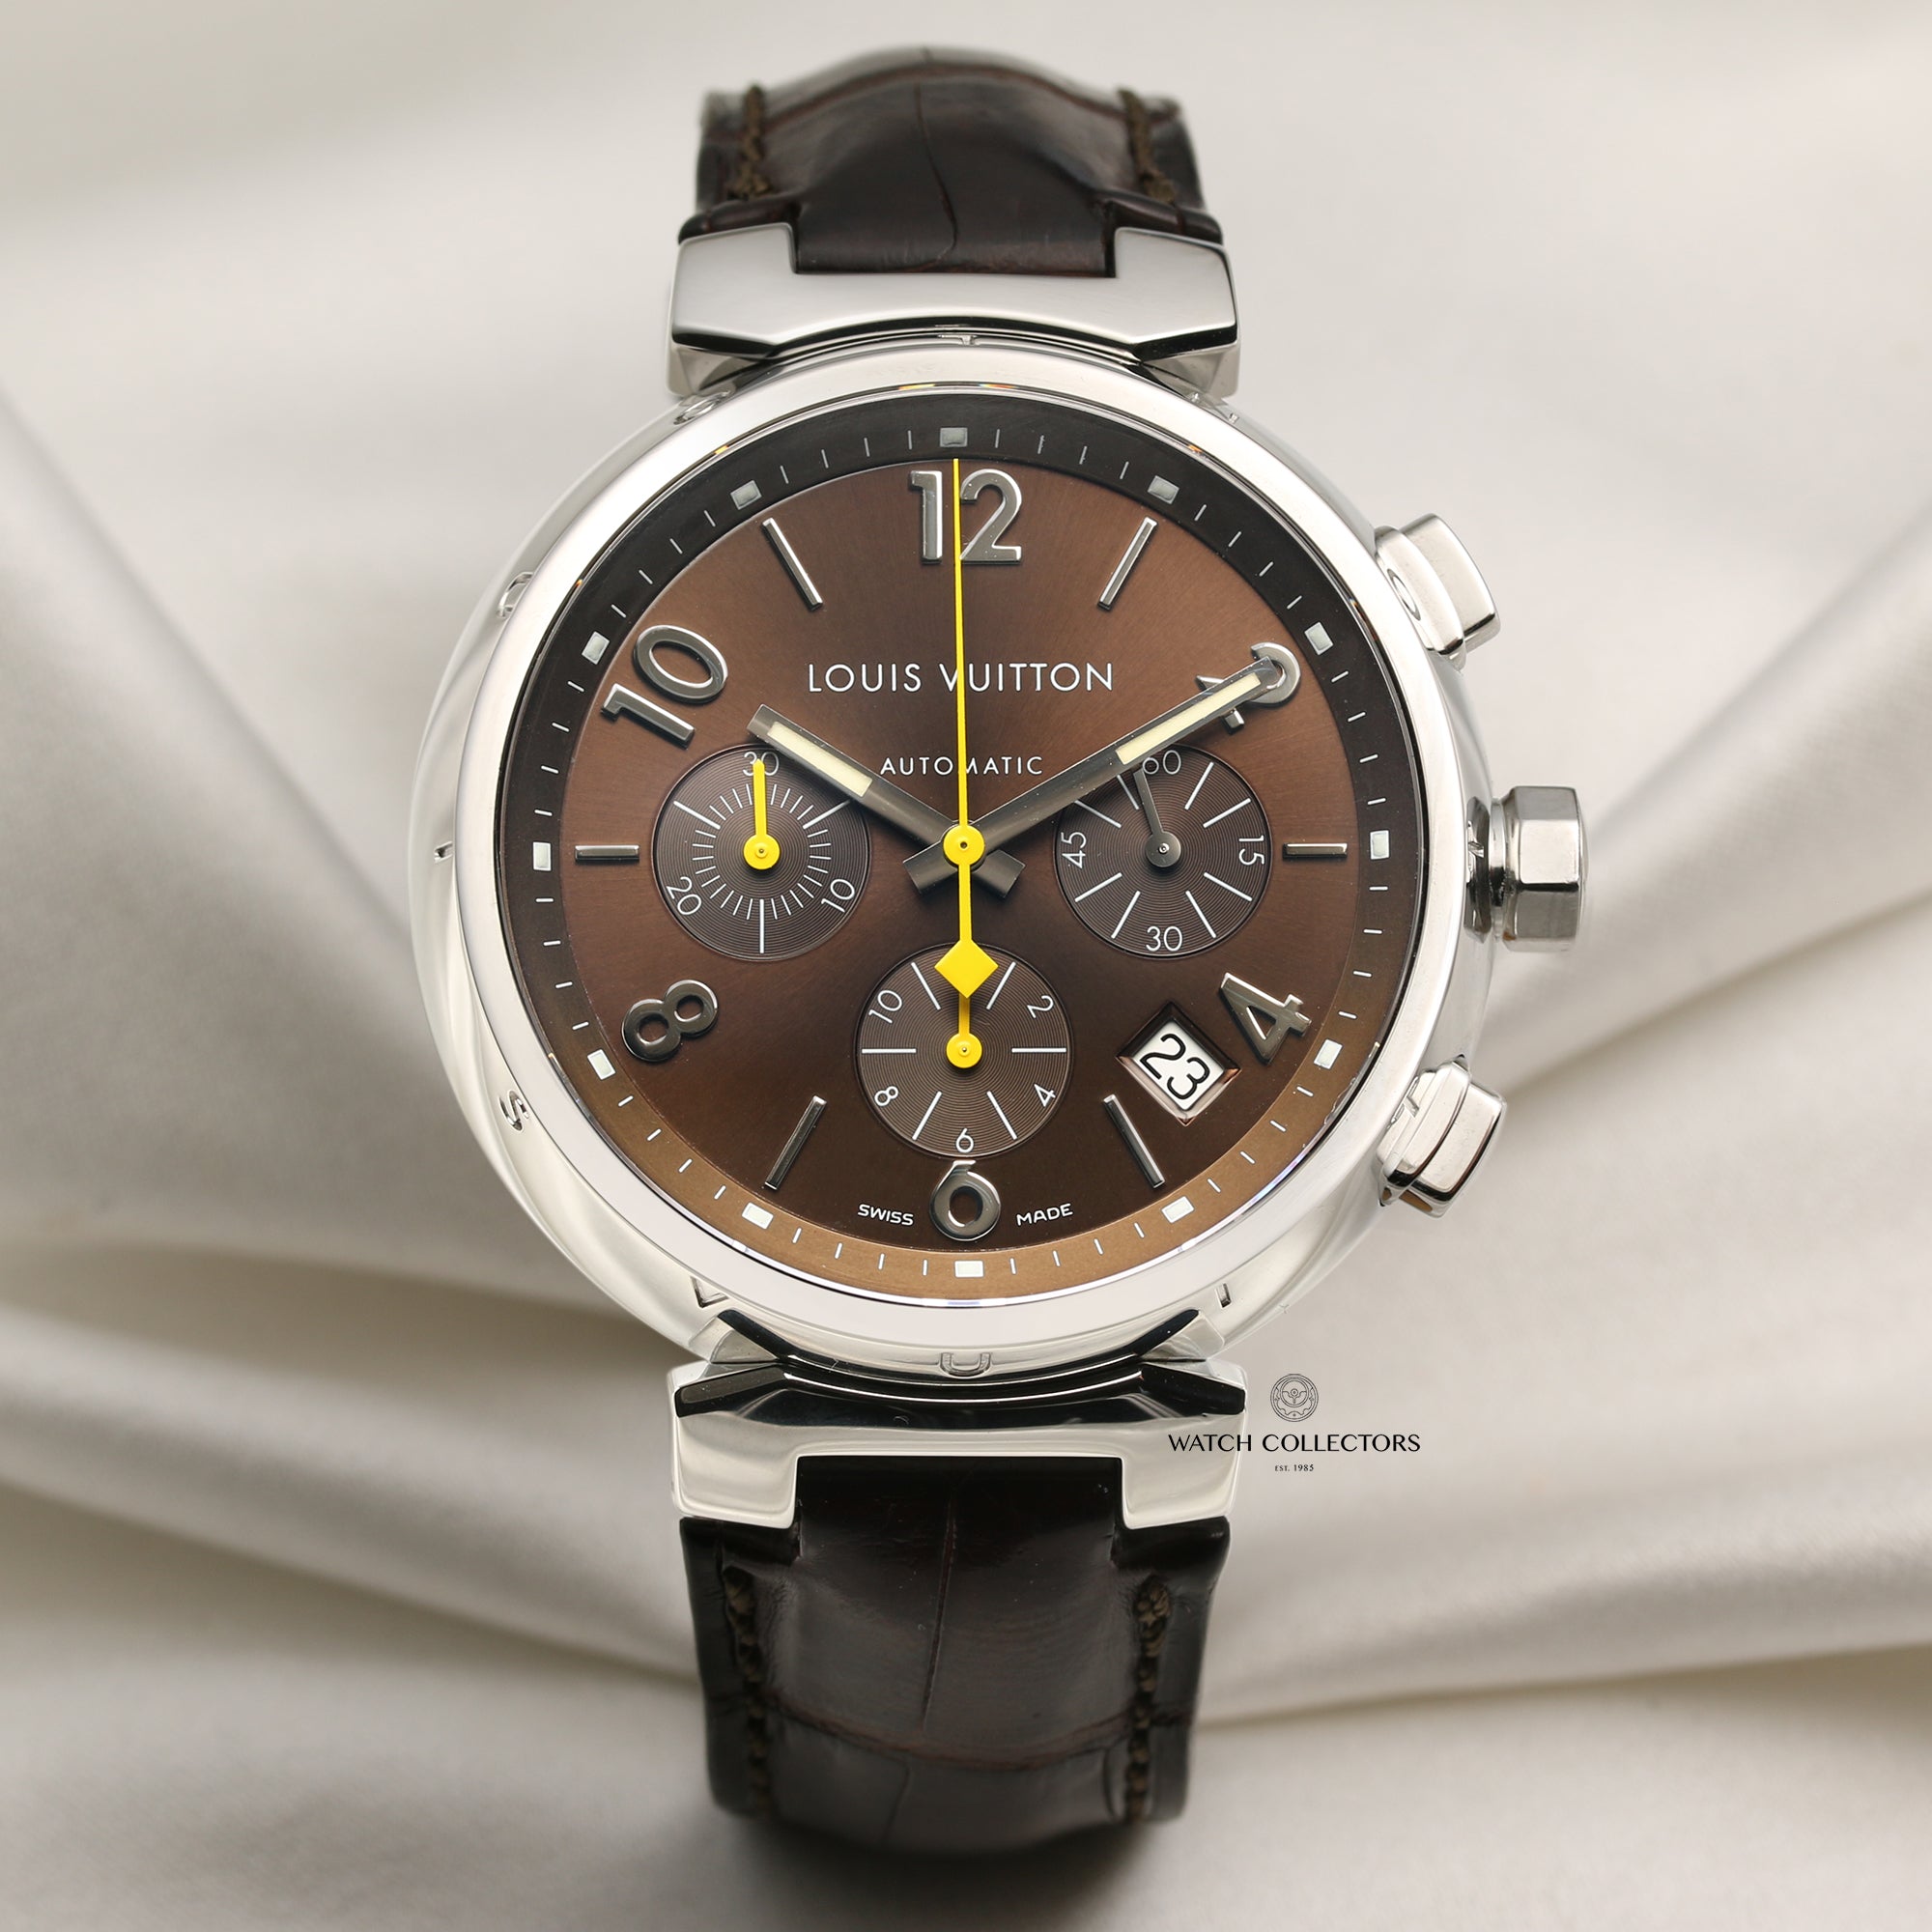 Pre-owned Louis Vuitton Tambour Chronograph Automatic Brown Dial Men's Watch Q1121, Automatic Movement, Stainless Steel Strap, 41 mm Case in Brown